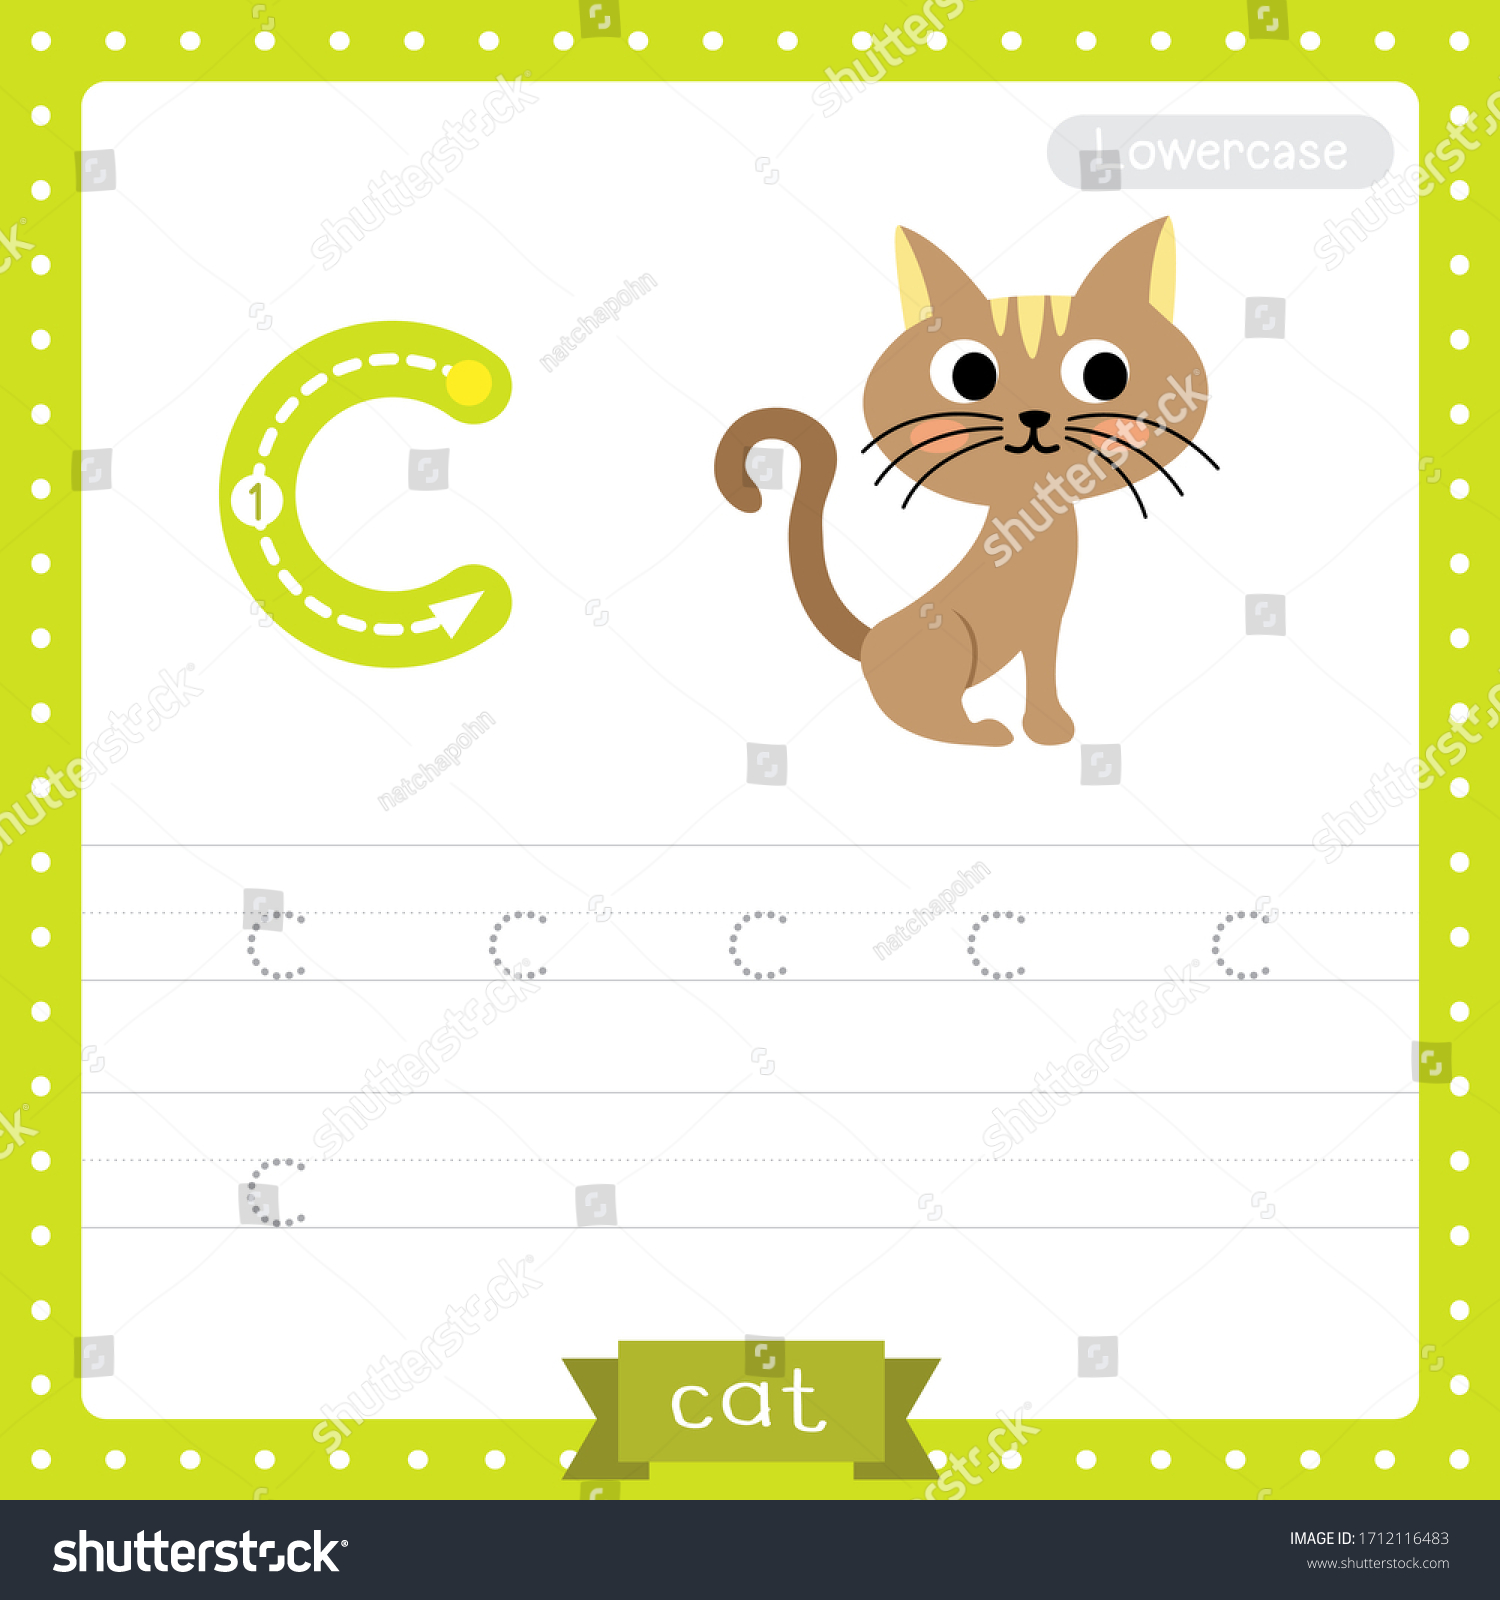 Letter C Lowercase Cute Children Colorful Stock Vector (Royalty Free ...